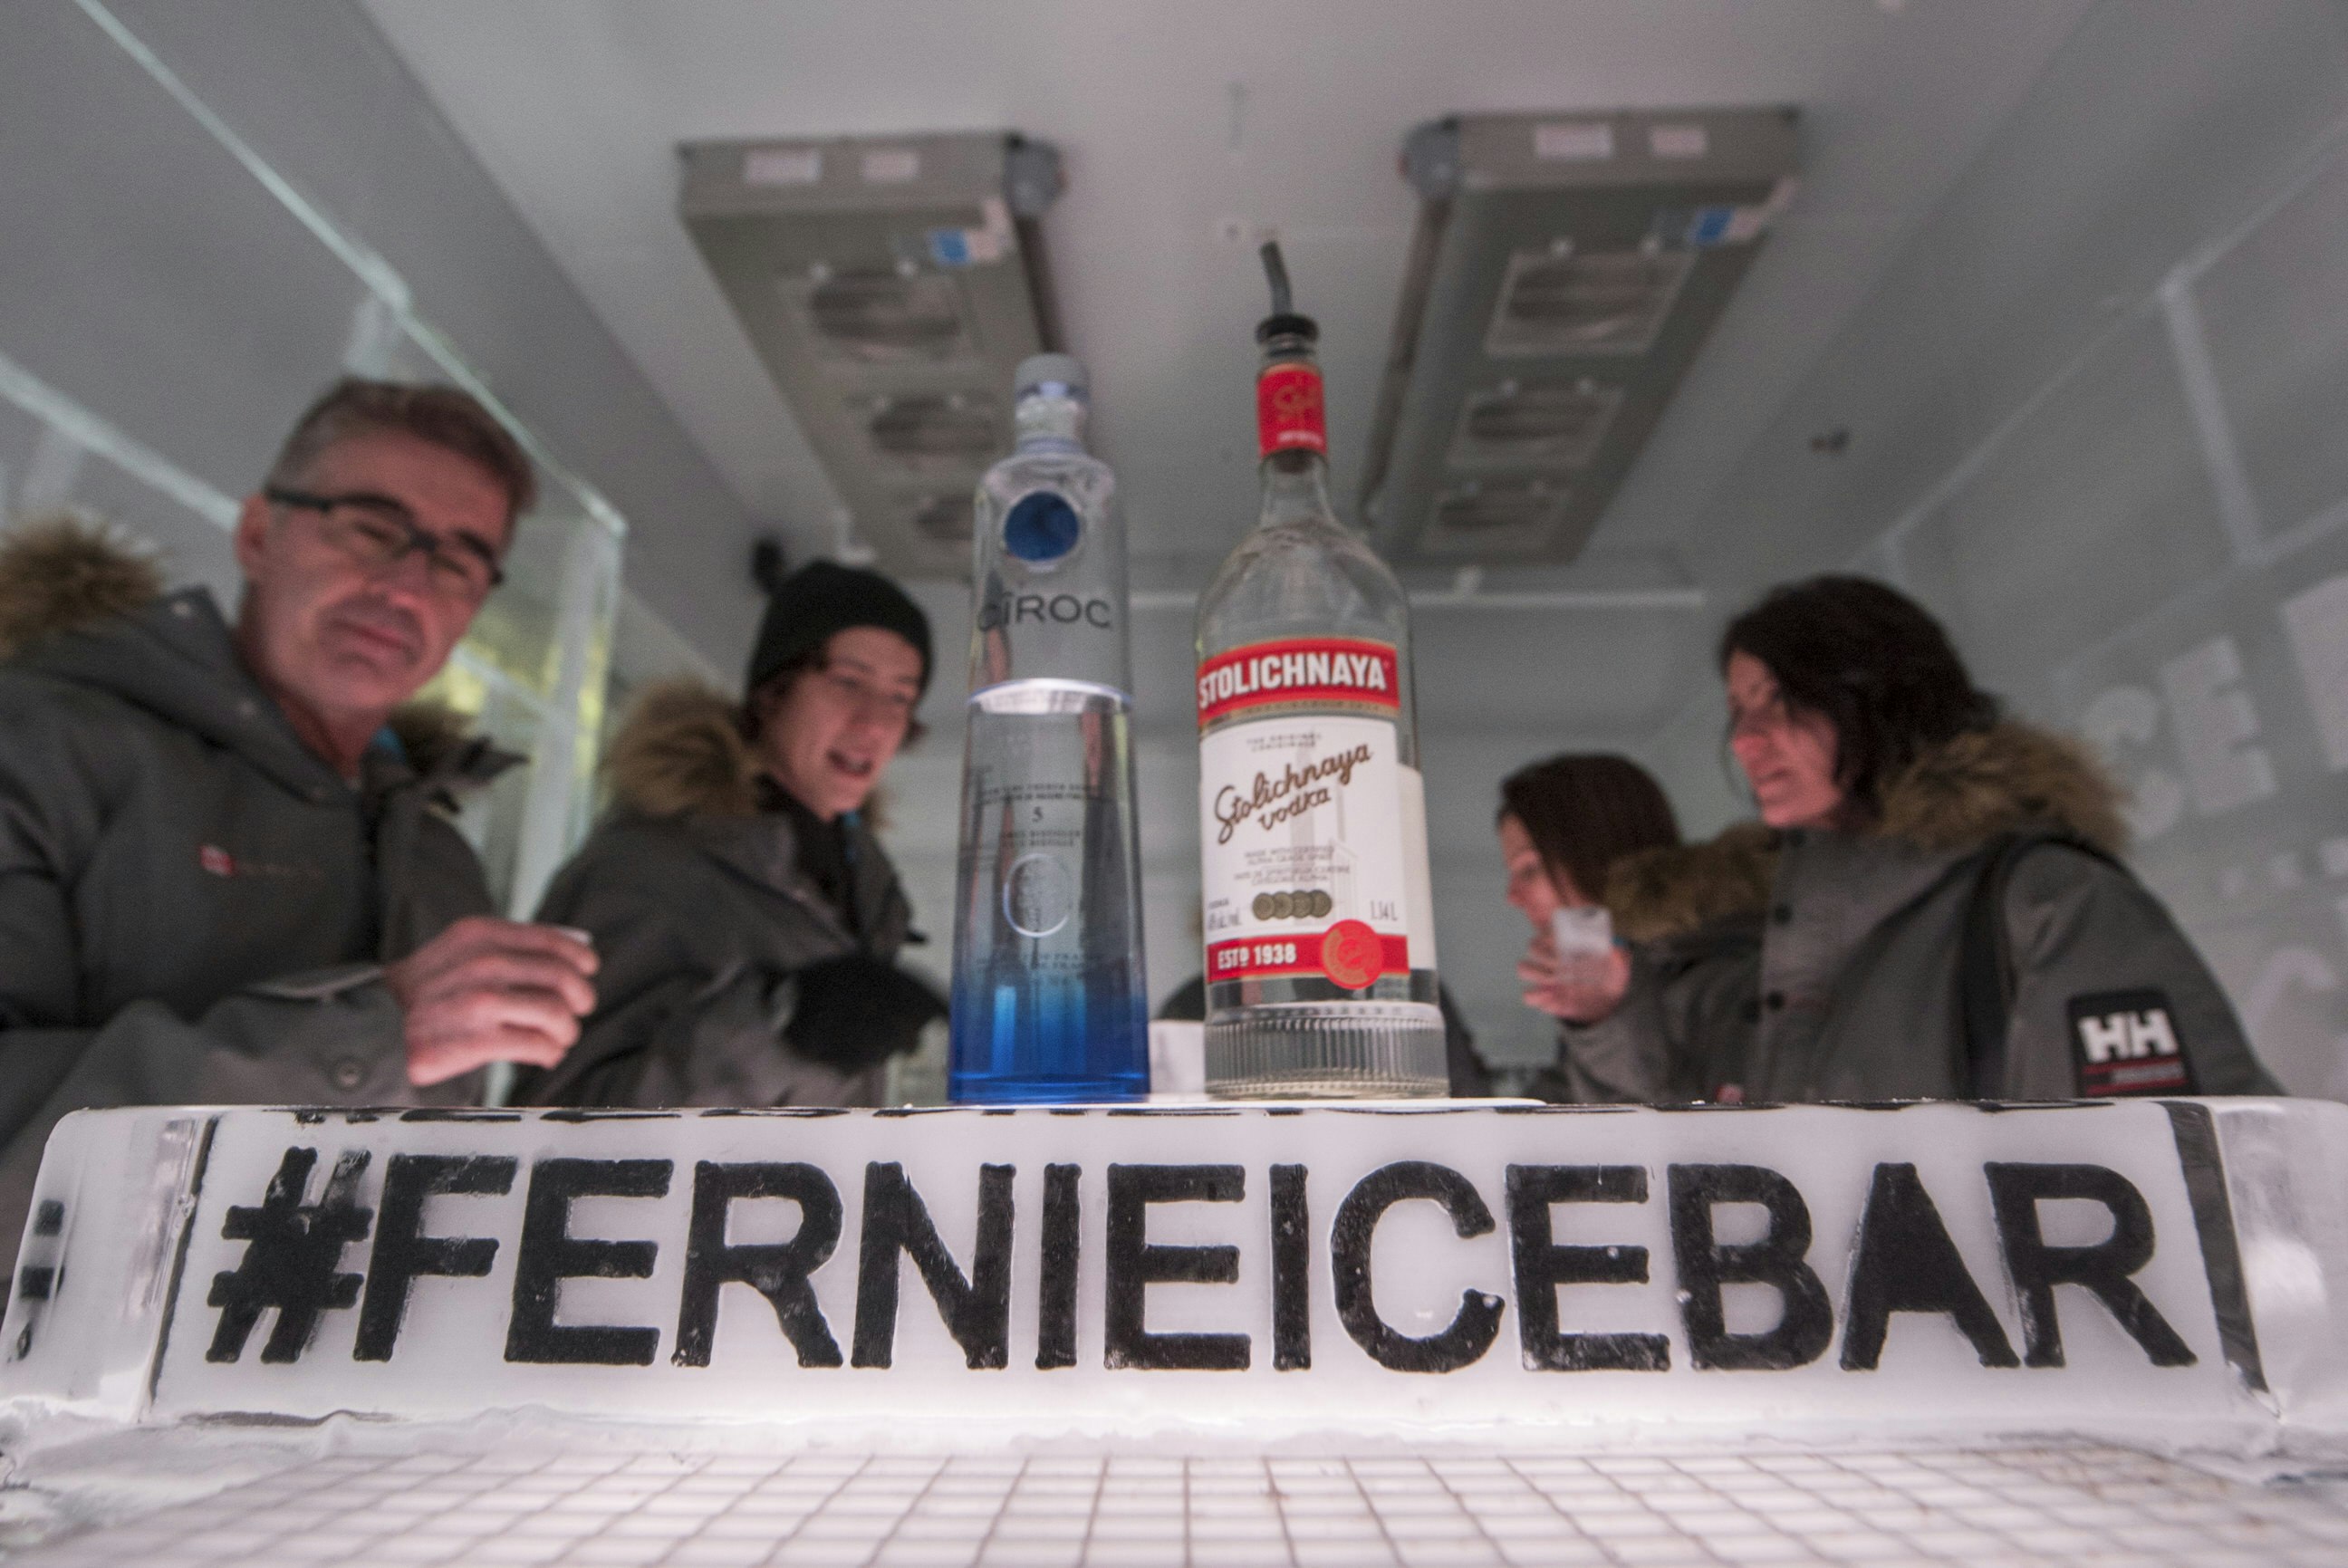 Five people are seated around a table in an ice bar, chatting. One of the people is obscured by two bottles of alcohol in the foreground. In front of those bottles is a sign made of ice with the bar's official hashtag.